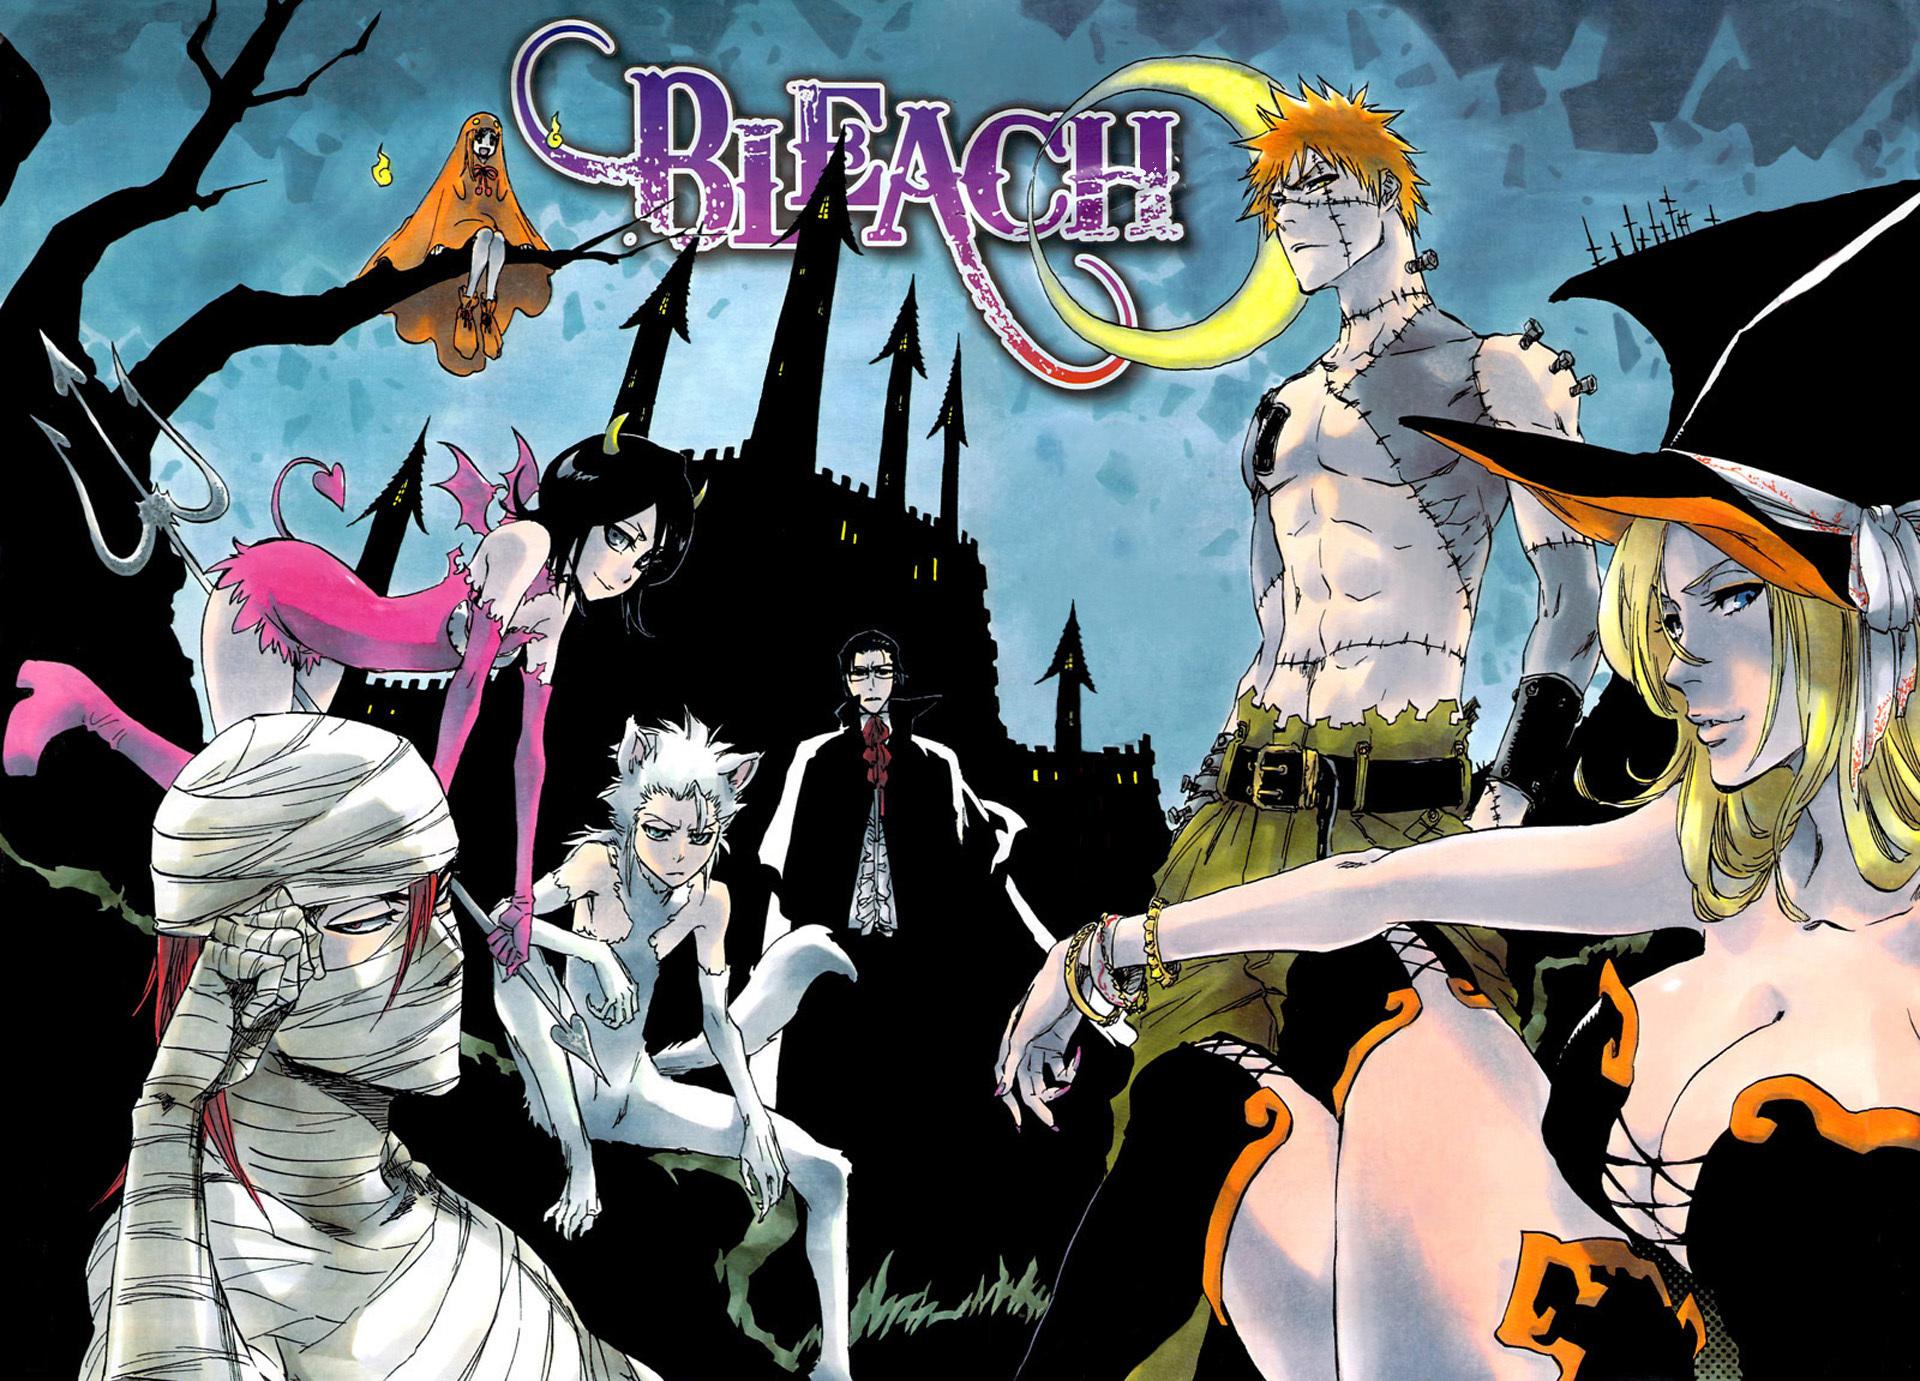 The Ultimate Guide to the Anime and Manga Series Bleach